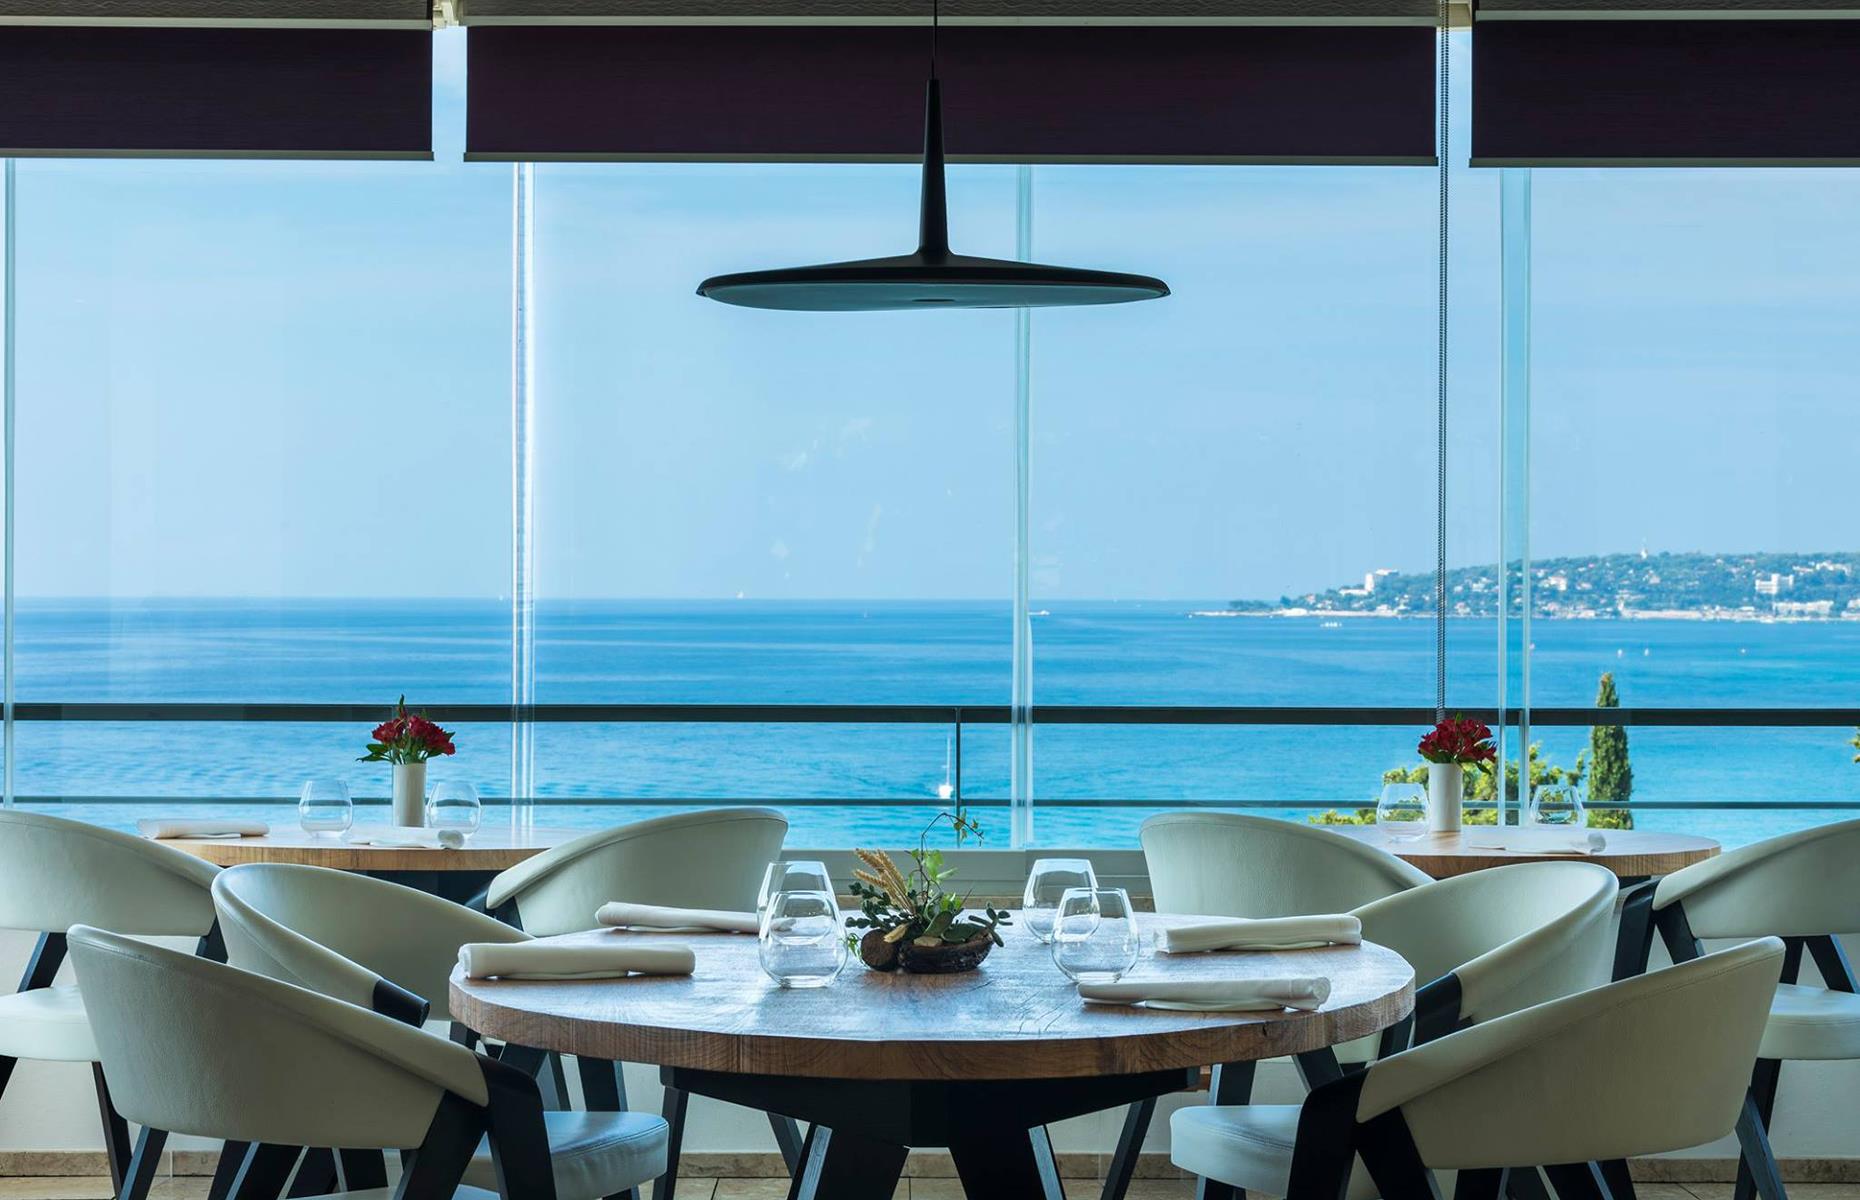 <p>If it's ever worth planning a trip around a place to eat, it's to dine at Mirazur, one of the world's best restaurants. The view overlooking the French Riviera, the service and the incredible French haute cuisine with chef Mauro Colagreco's Argentinian touches create a perfect once-in-a-lifetime dining experience. </p>  <p><strong><a href="https://www.lovefood.com/gallerylist/86241/the-worlds-50-best-restaurants-revealed">Discover more of the world's top restaurants here</a></strong></p>